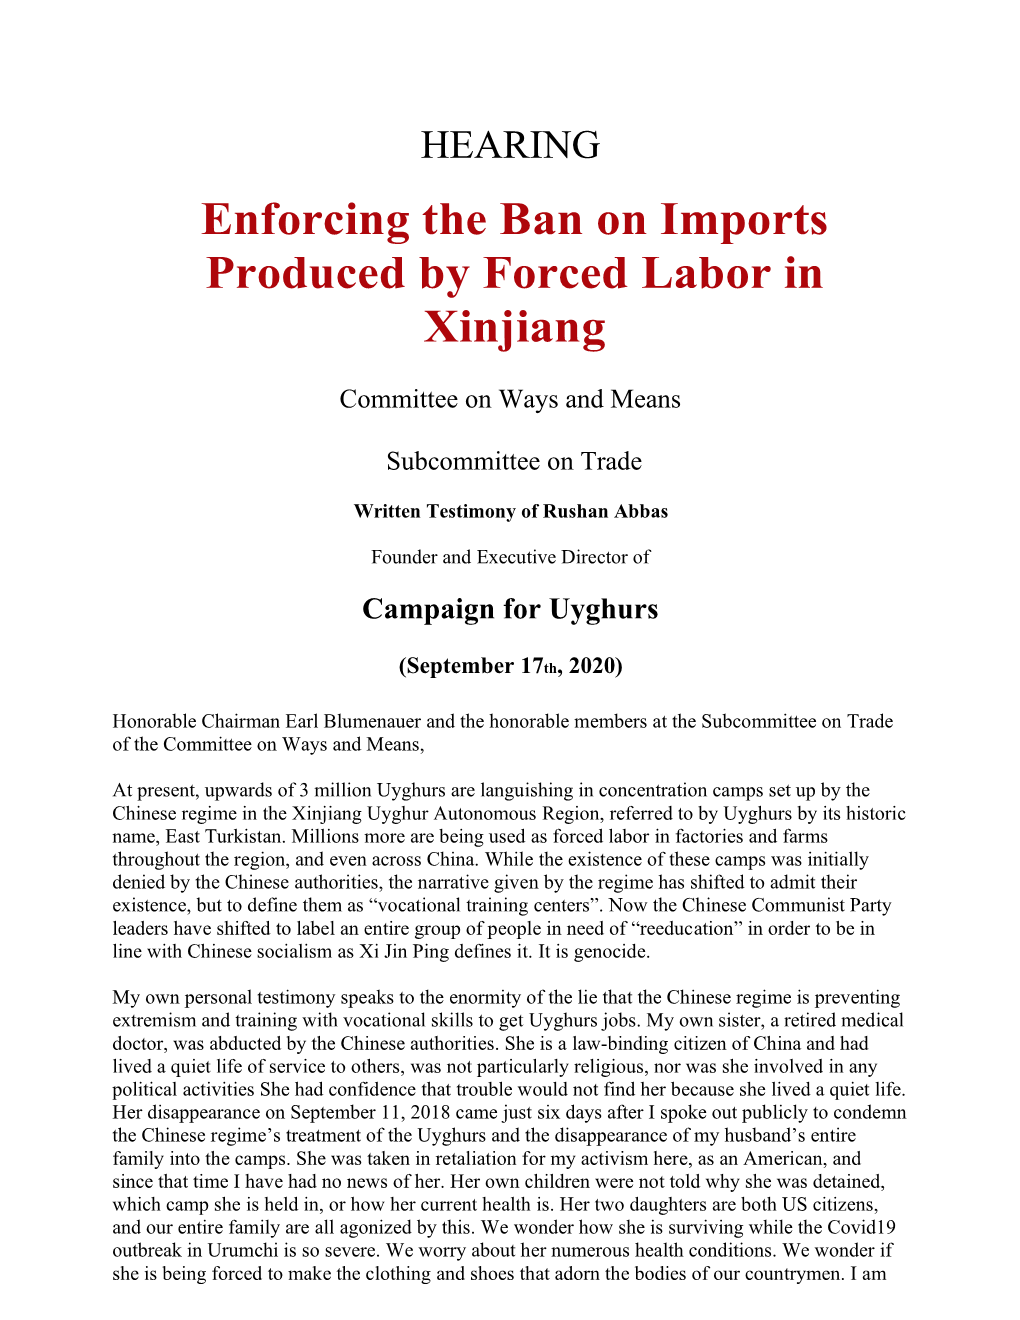 Enforcing the Ban on Imports Produced by Forced Labor in Xinjiang